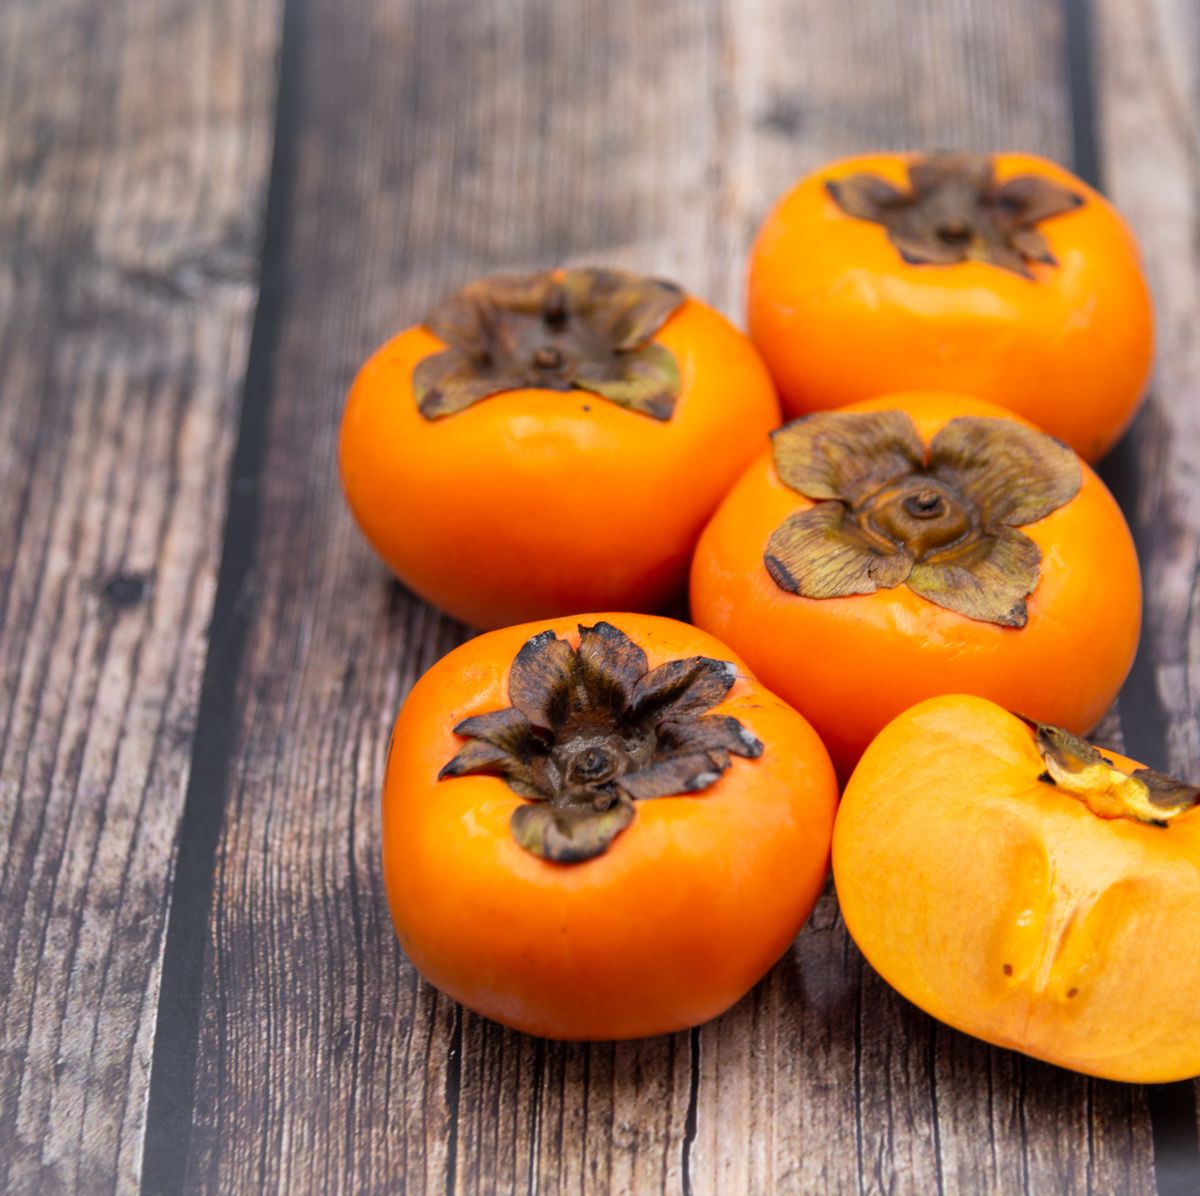 https://hips.hearstapps.com/hmg-prod/images/persimmon-fruit-on-old-wooden-background-top-view-royalty-free-image-1651607677.jpg?crop=0.663xw:1.00xh;0.284xw,0&resize=1200:*